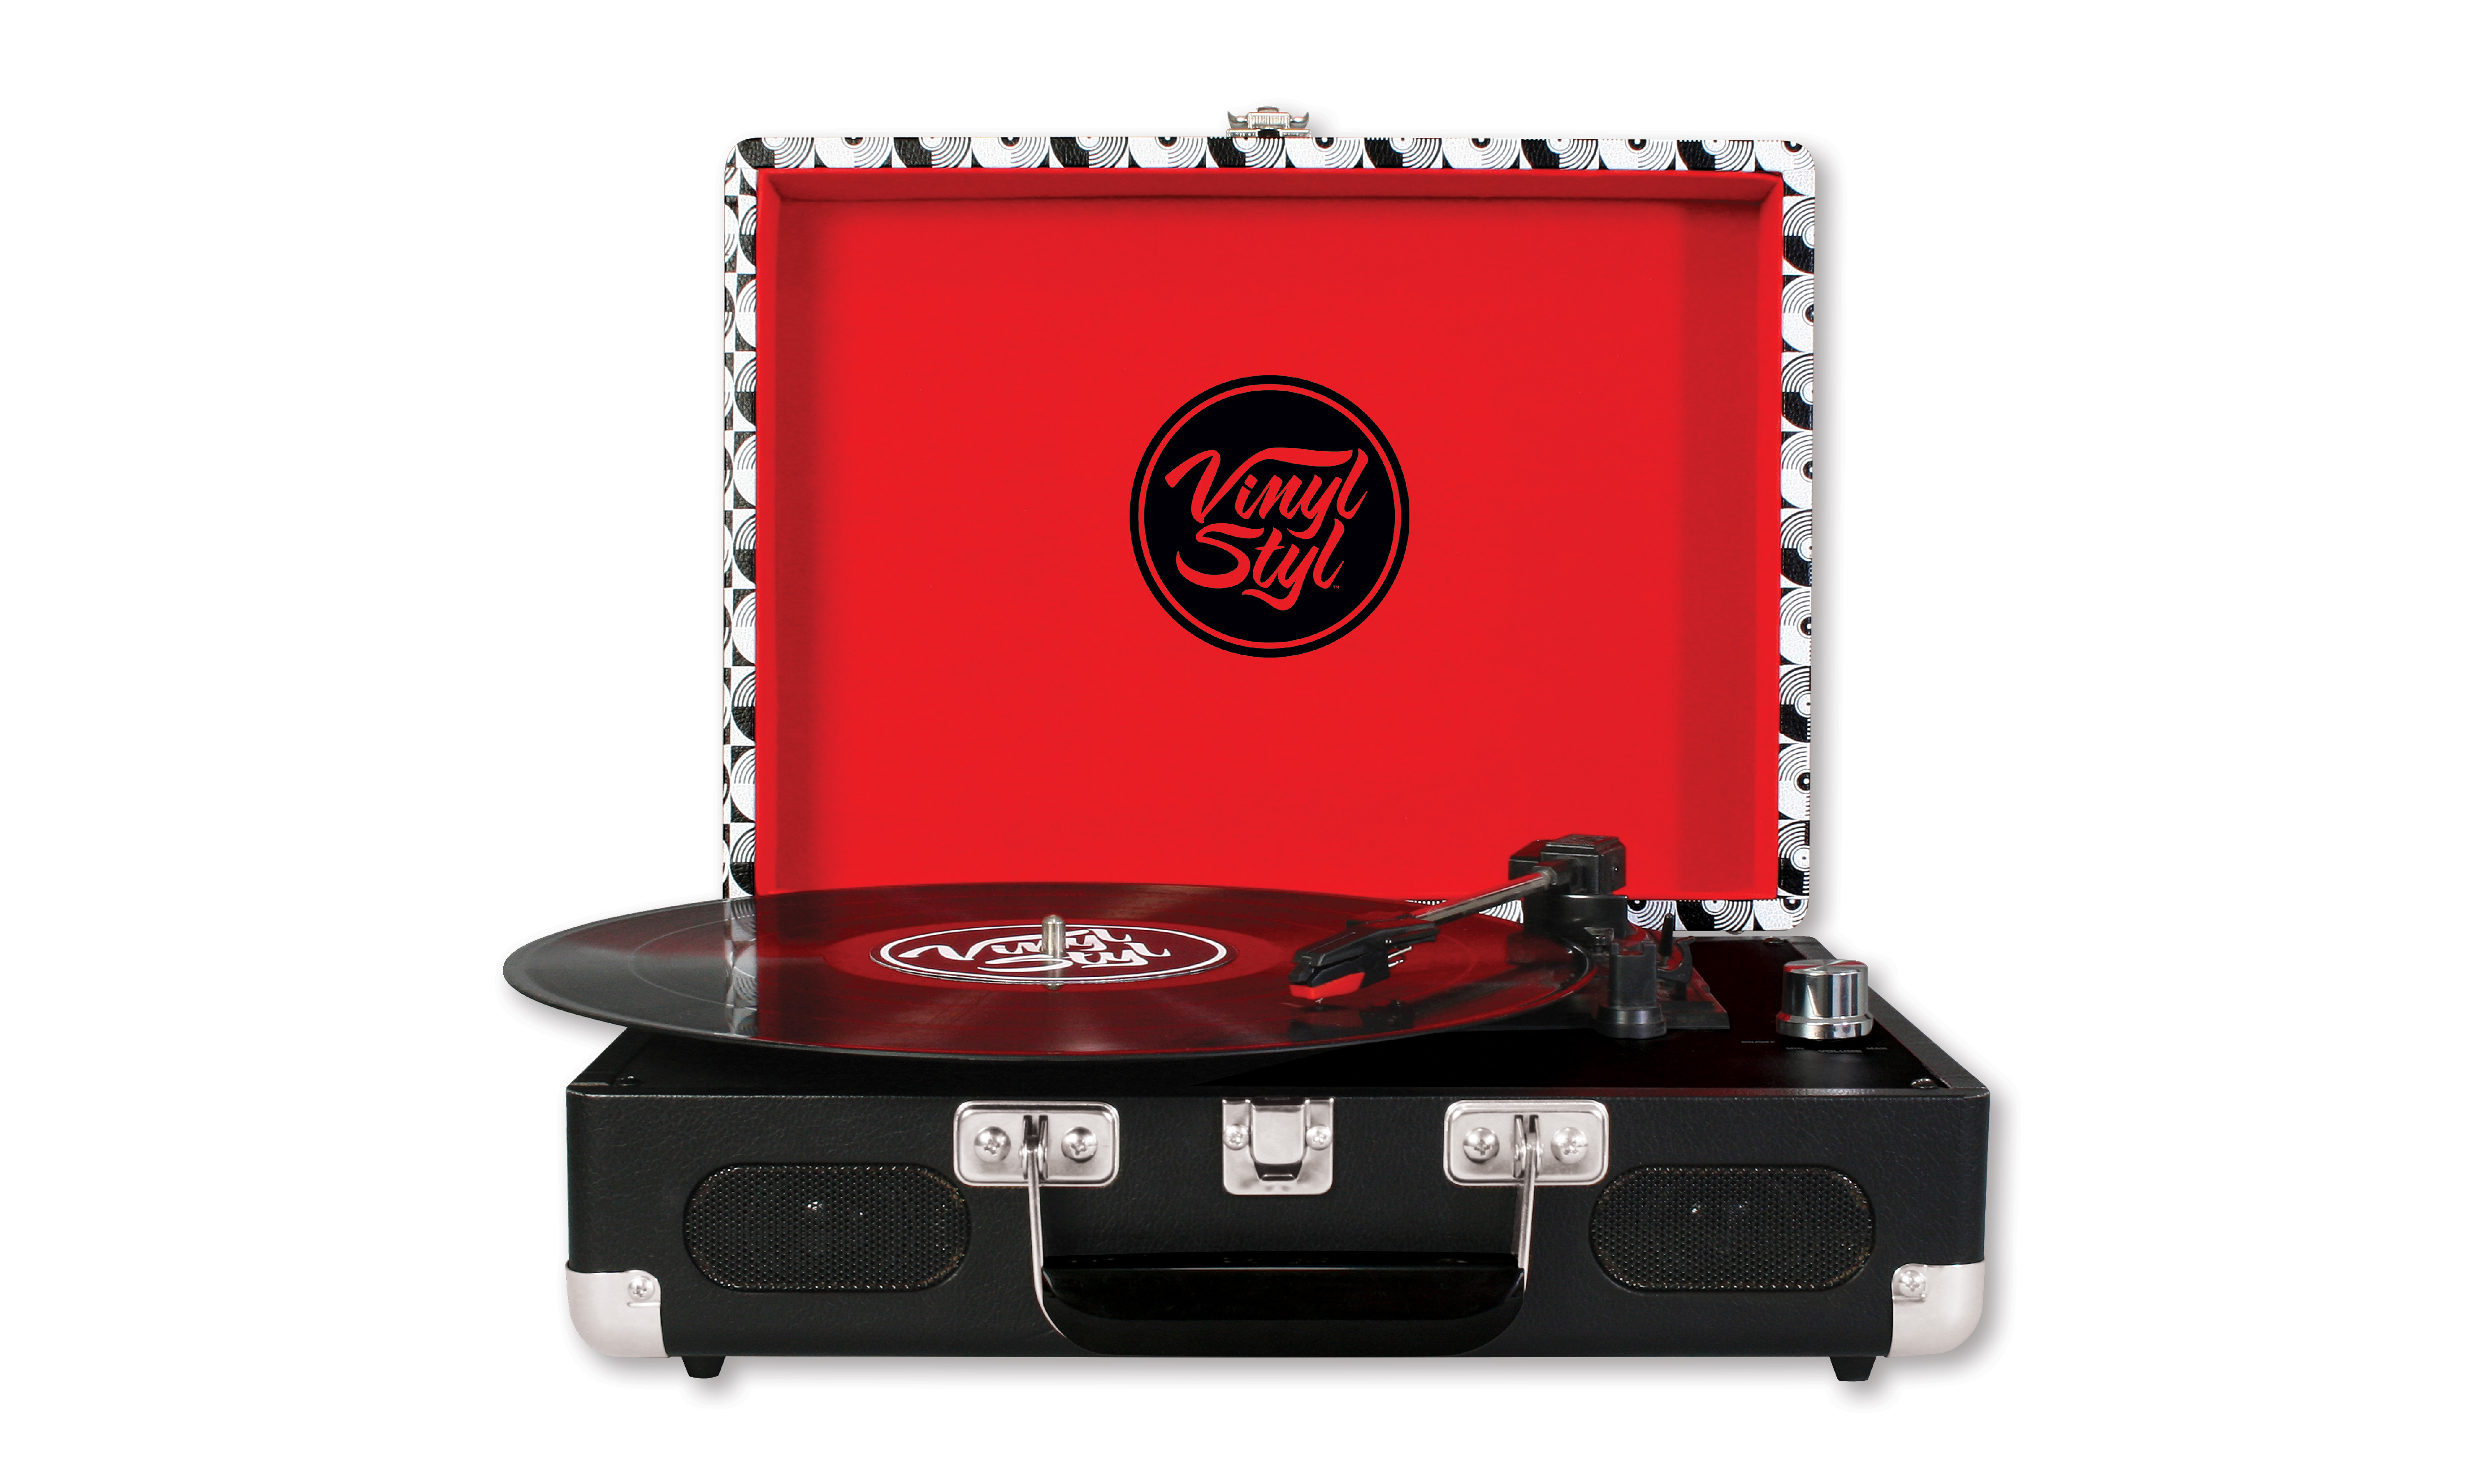 VINYL STYL™ GROOVE PORTABLE 3 SPEED TURNTABLE (RECORD PATTERN